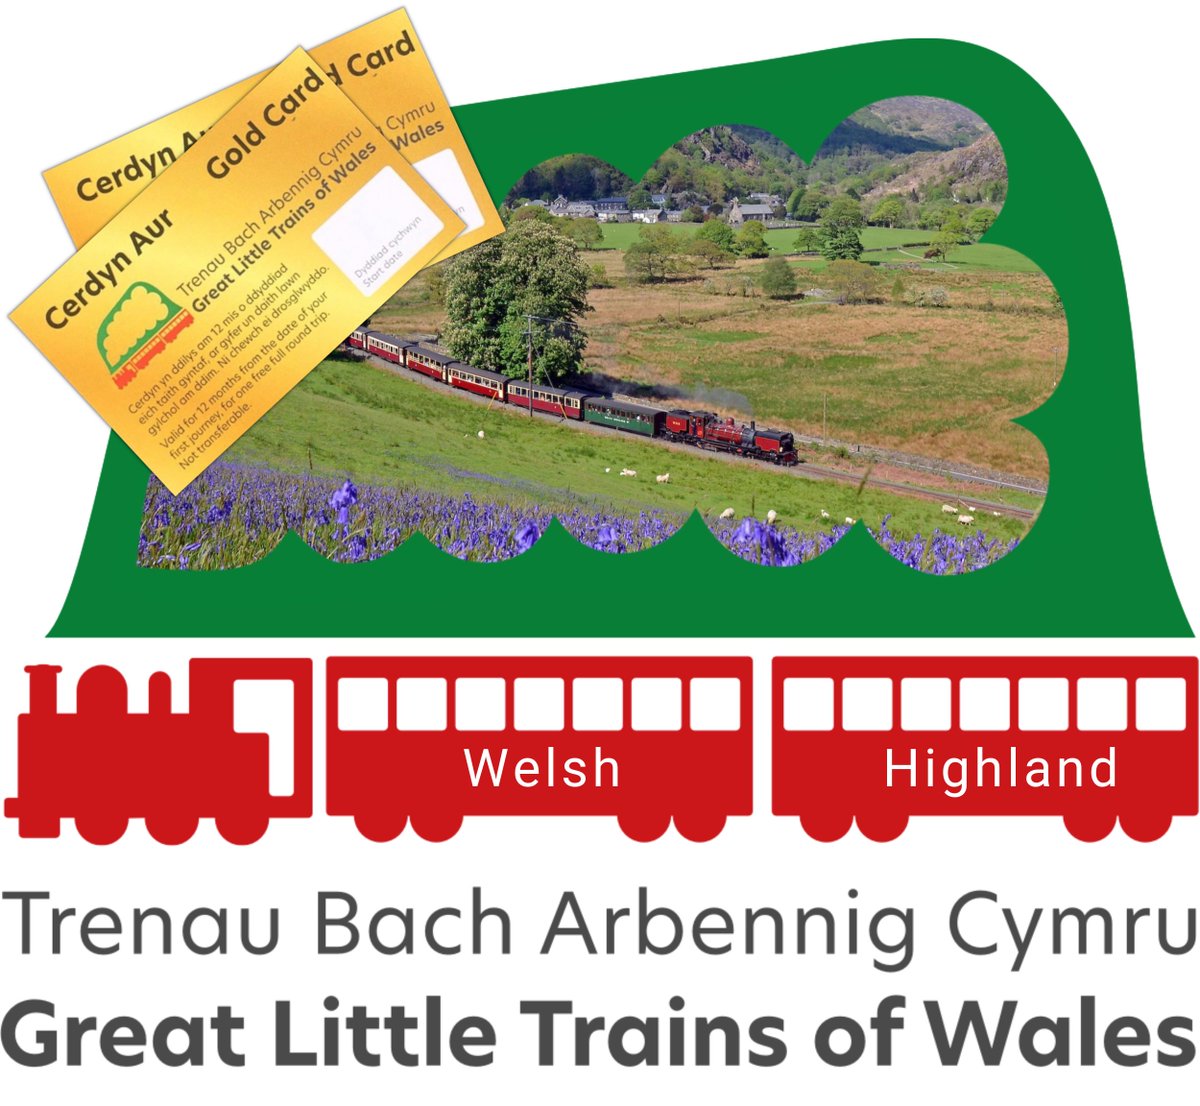 🎟️ 11 magnificent railways on 1 card. Our Gold Card now has £23 off until 13th April 2023 🚂 Start planning your Gr8 Little adventure #23off2023 🔗 loom.ly/oE8uHOs 📸 @festrail Welsh Highland Railway #narrowgauge #heritagerail #railway #explorer #wales #23off23days2023